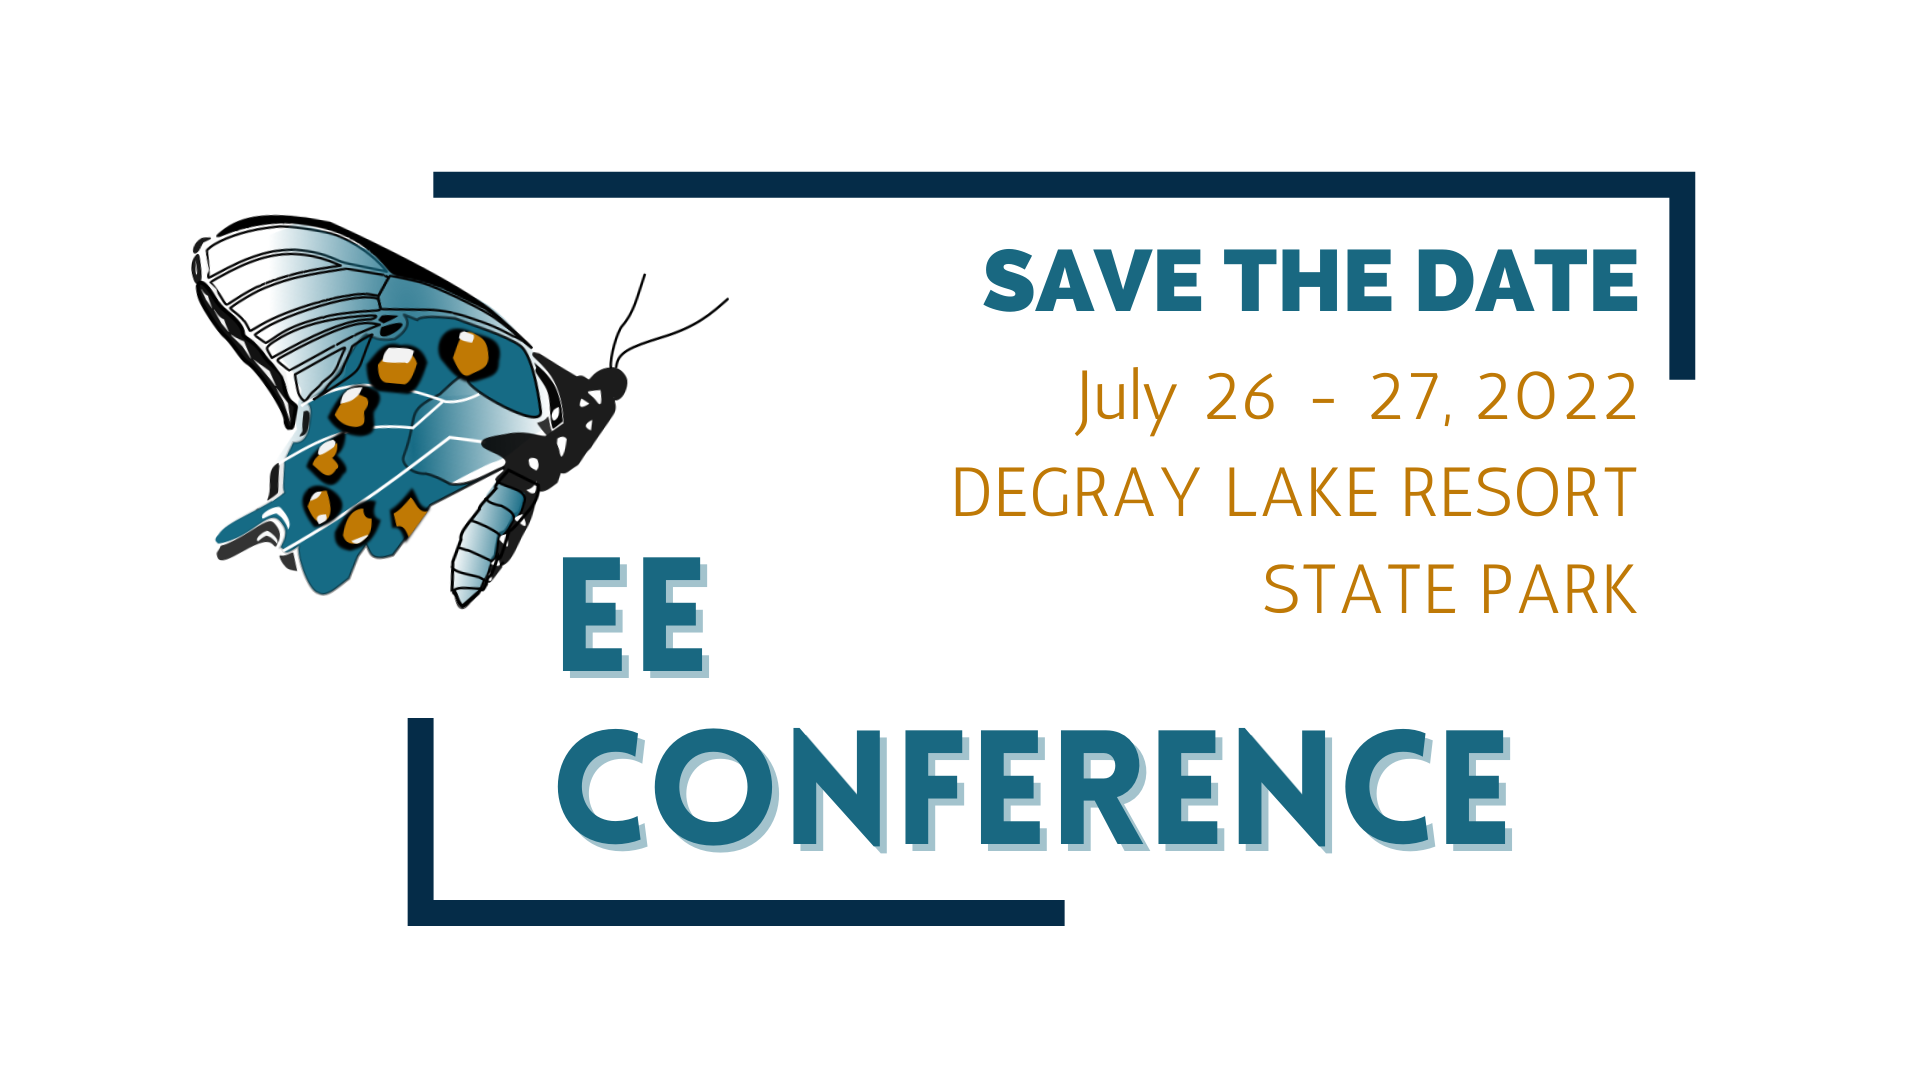 Conference image with butterfly, July date, and location